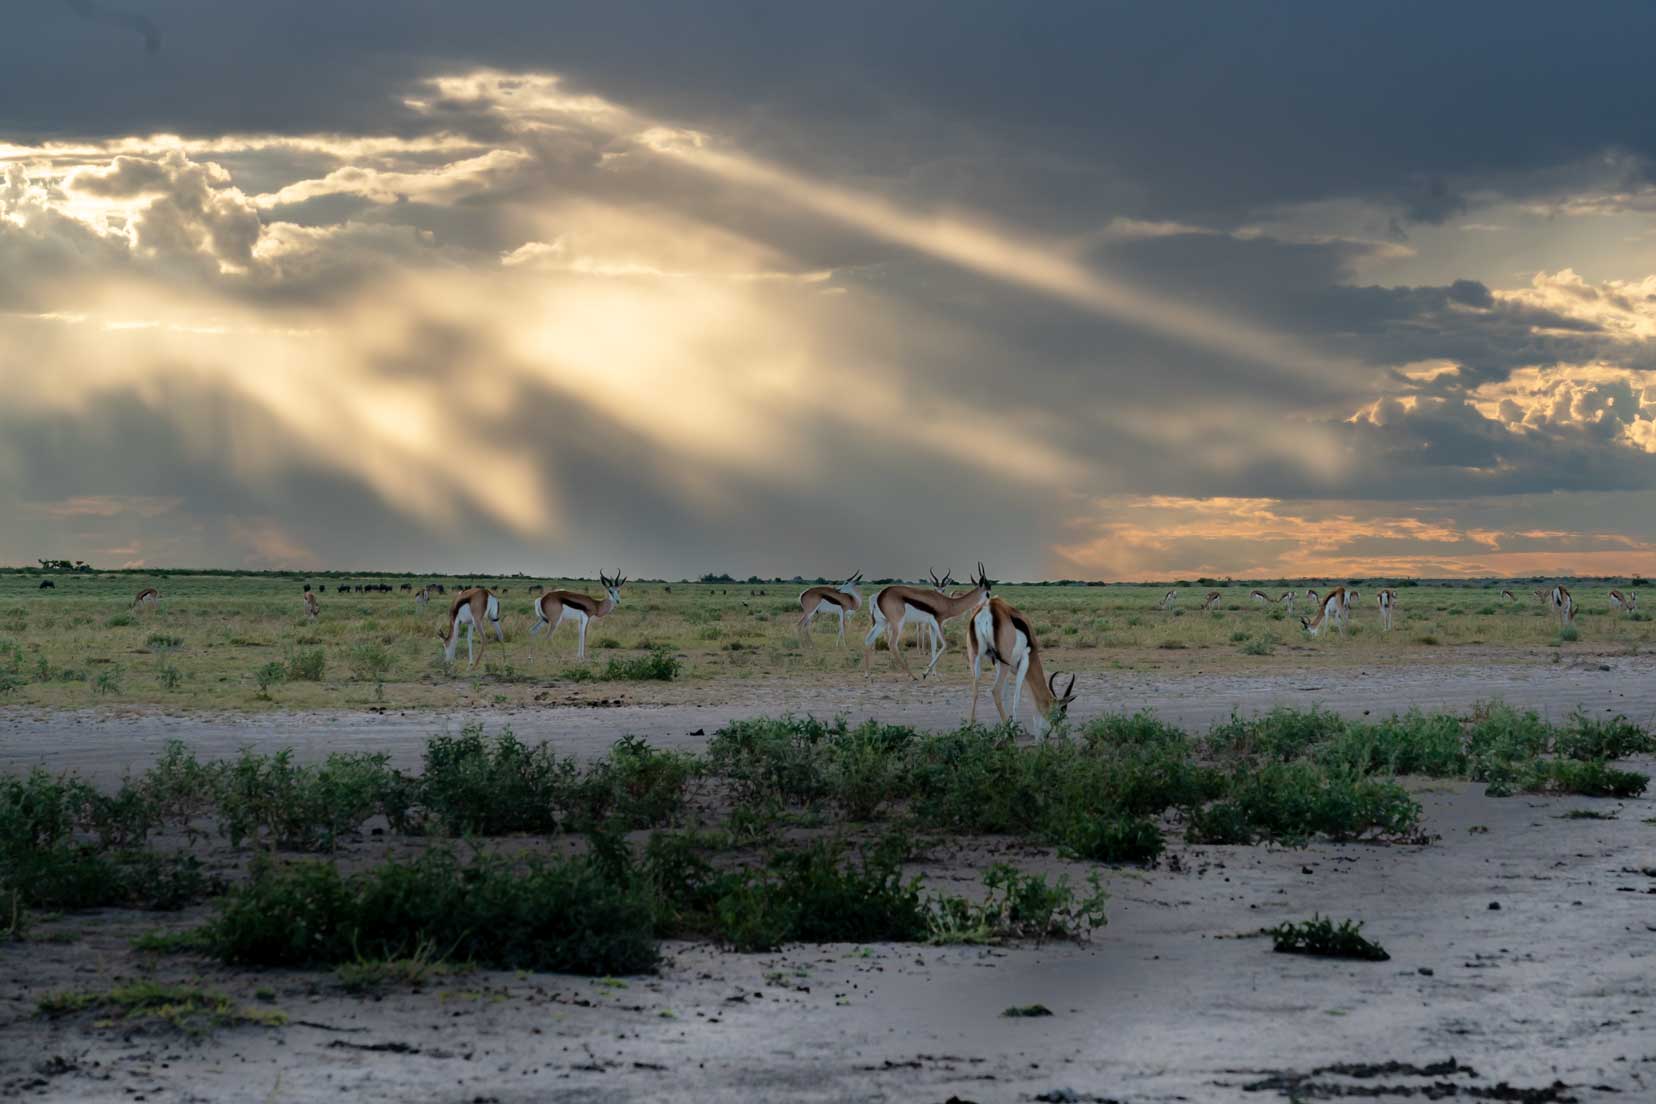 Evening setting in over Piper Pan with dark clouds and springbok grazing